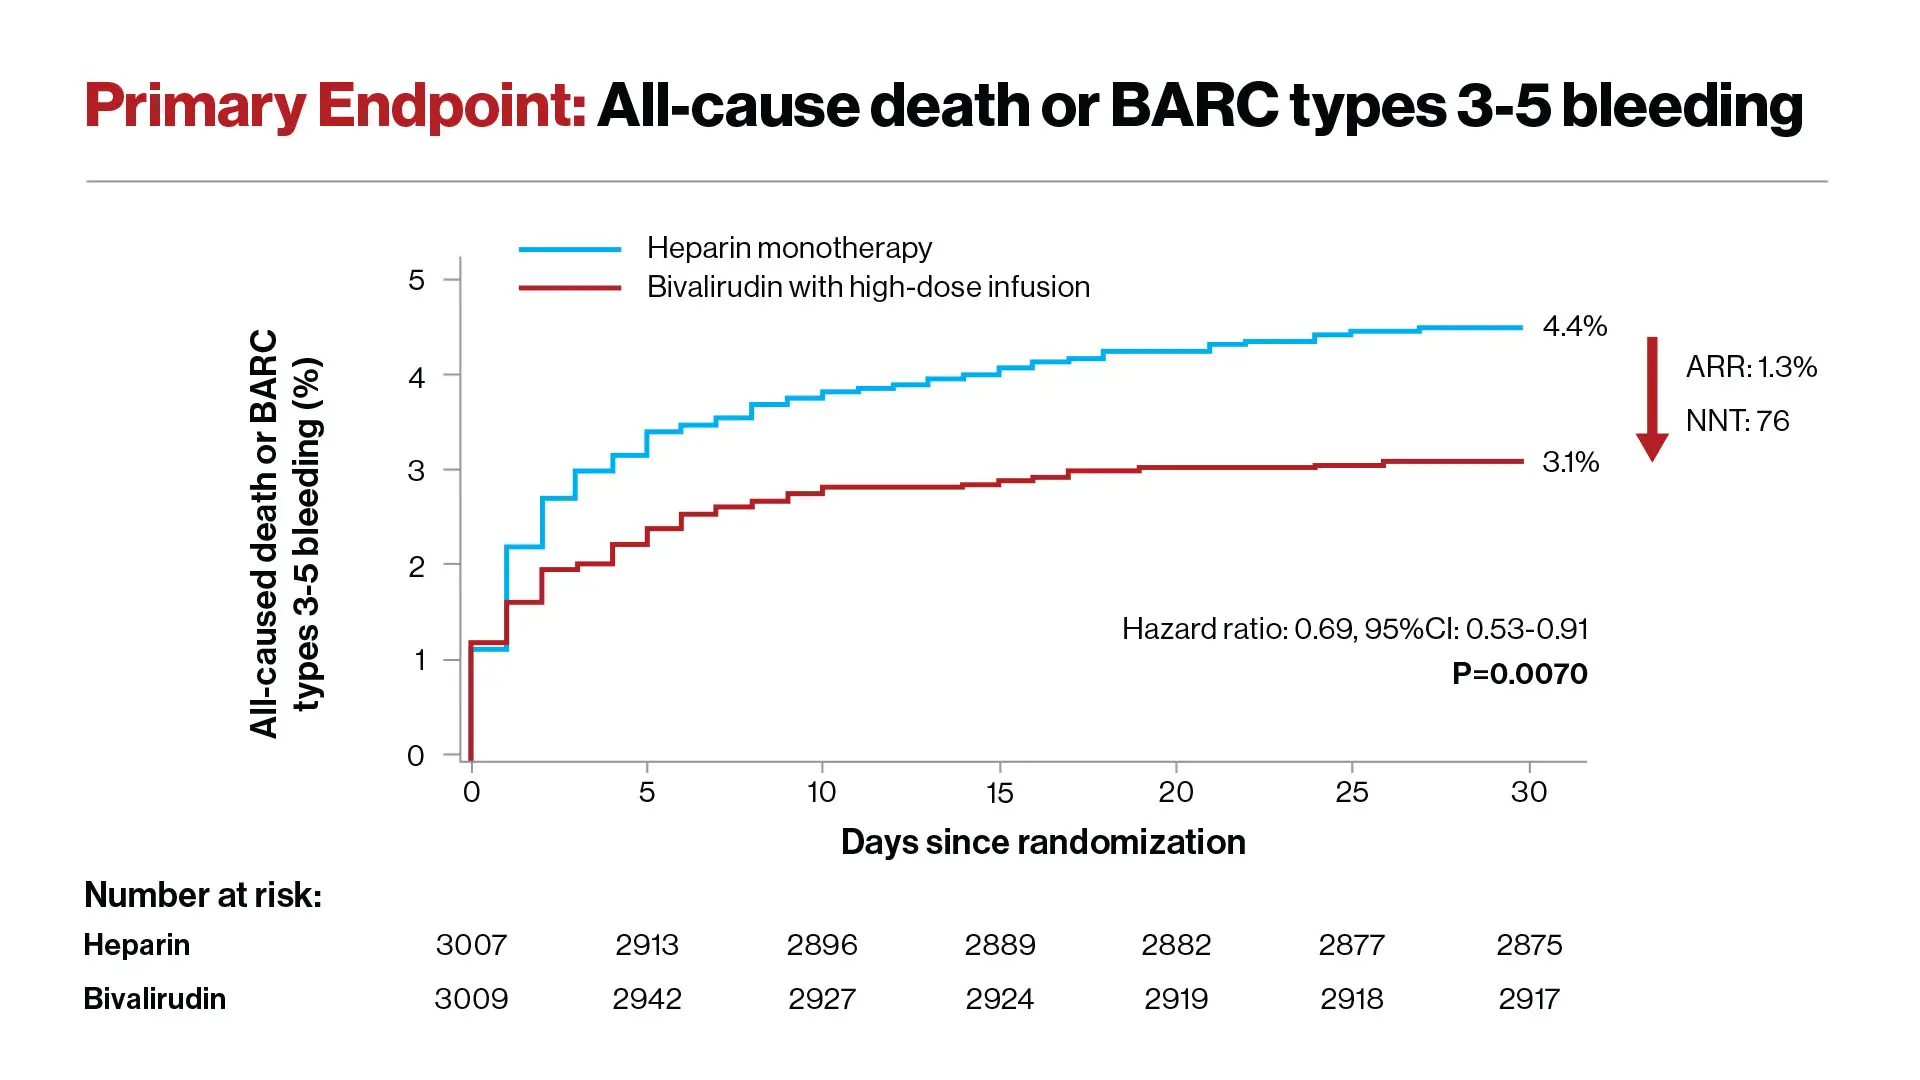 Reduction in the risk of death or major bleeding after primary PCI in patients with STEMI treated with heparin monotherapy (blue curve) or bivalirudin with a post-procedure infusion (red curve). The hazard ratio of 0.69 signifies a 31% reduction in risk. The ARR (absolute risk reduction) was 1.3%. 

